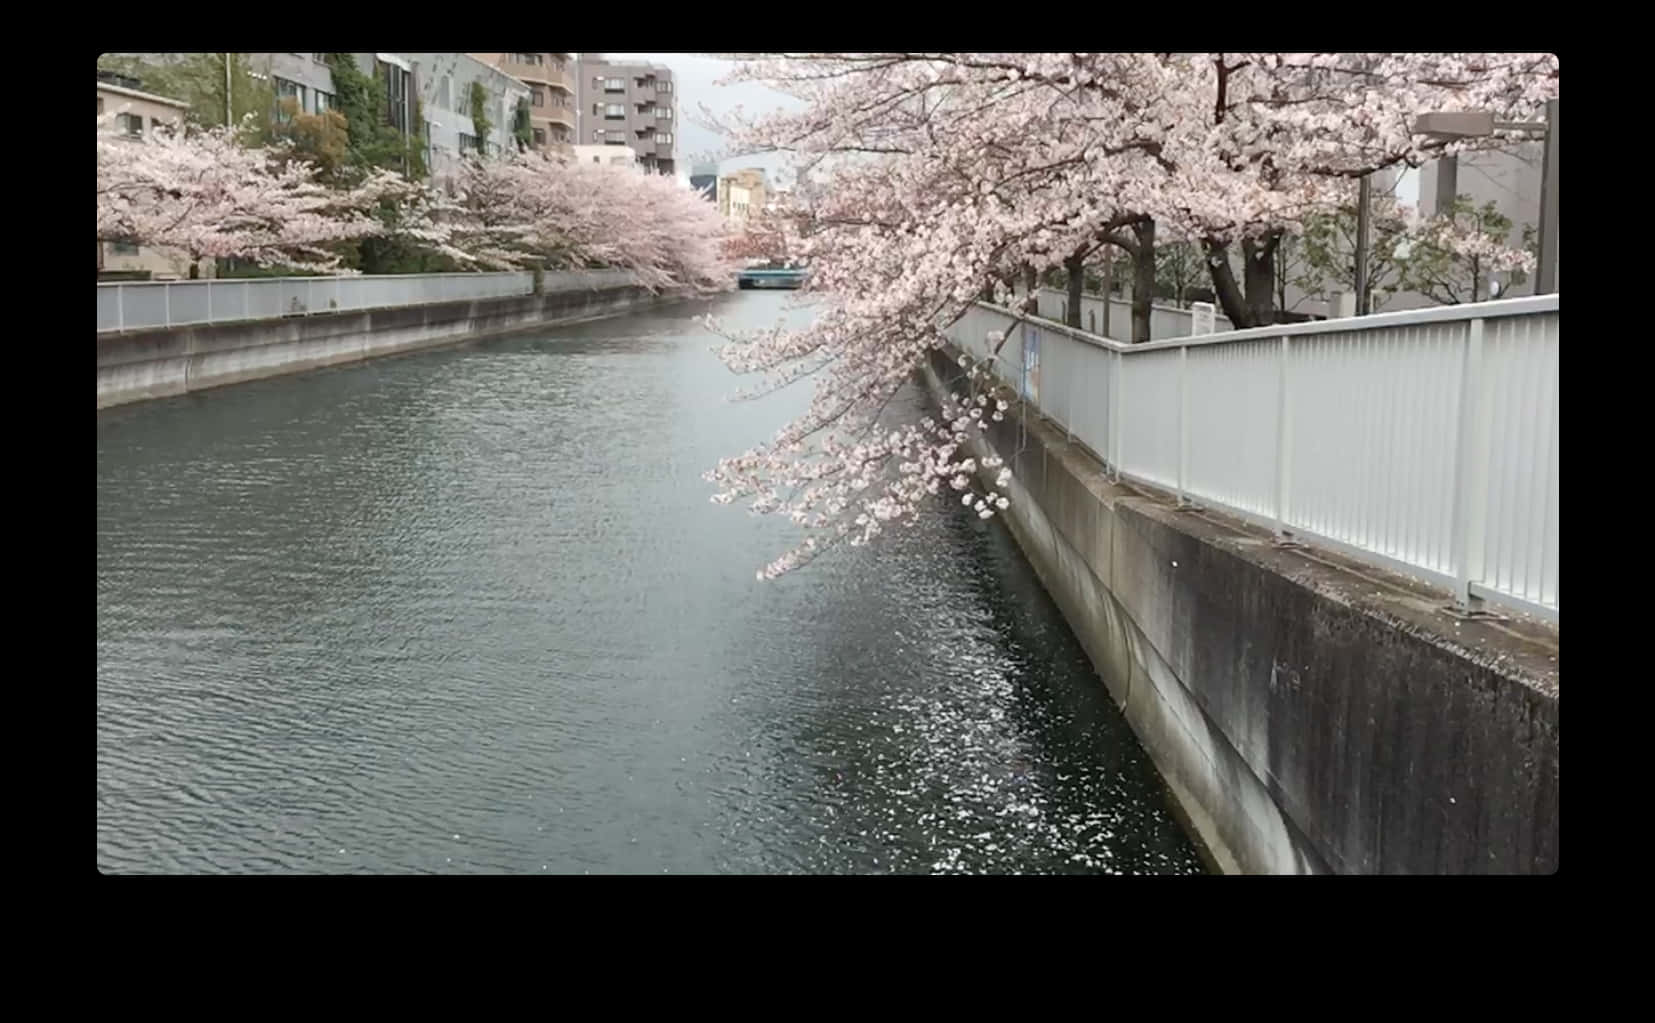 A River With Pink Flowers